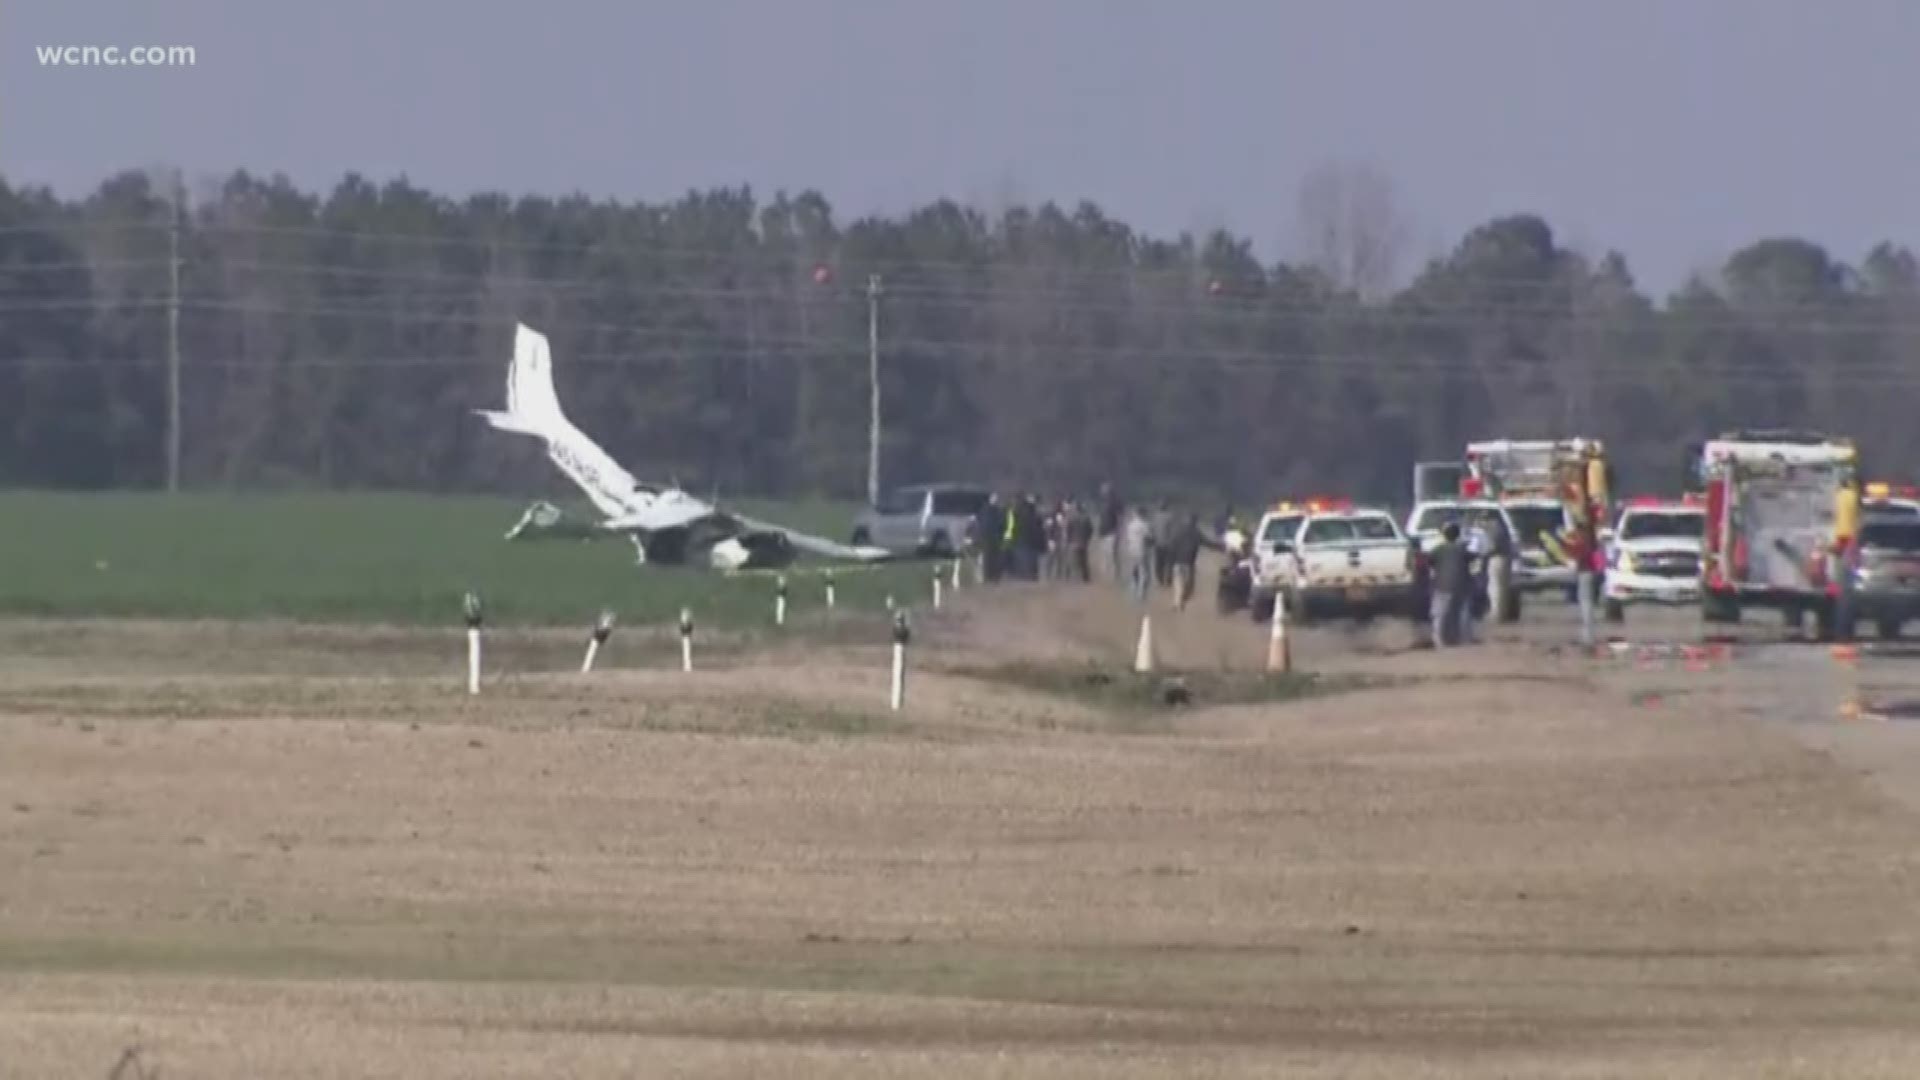 A plane ran off a runway and landed nose down off Butler Nursery Road Monday afternoon during an event showcasing careers in aviation.